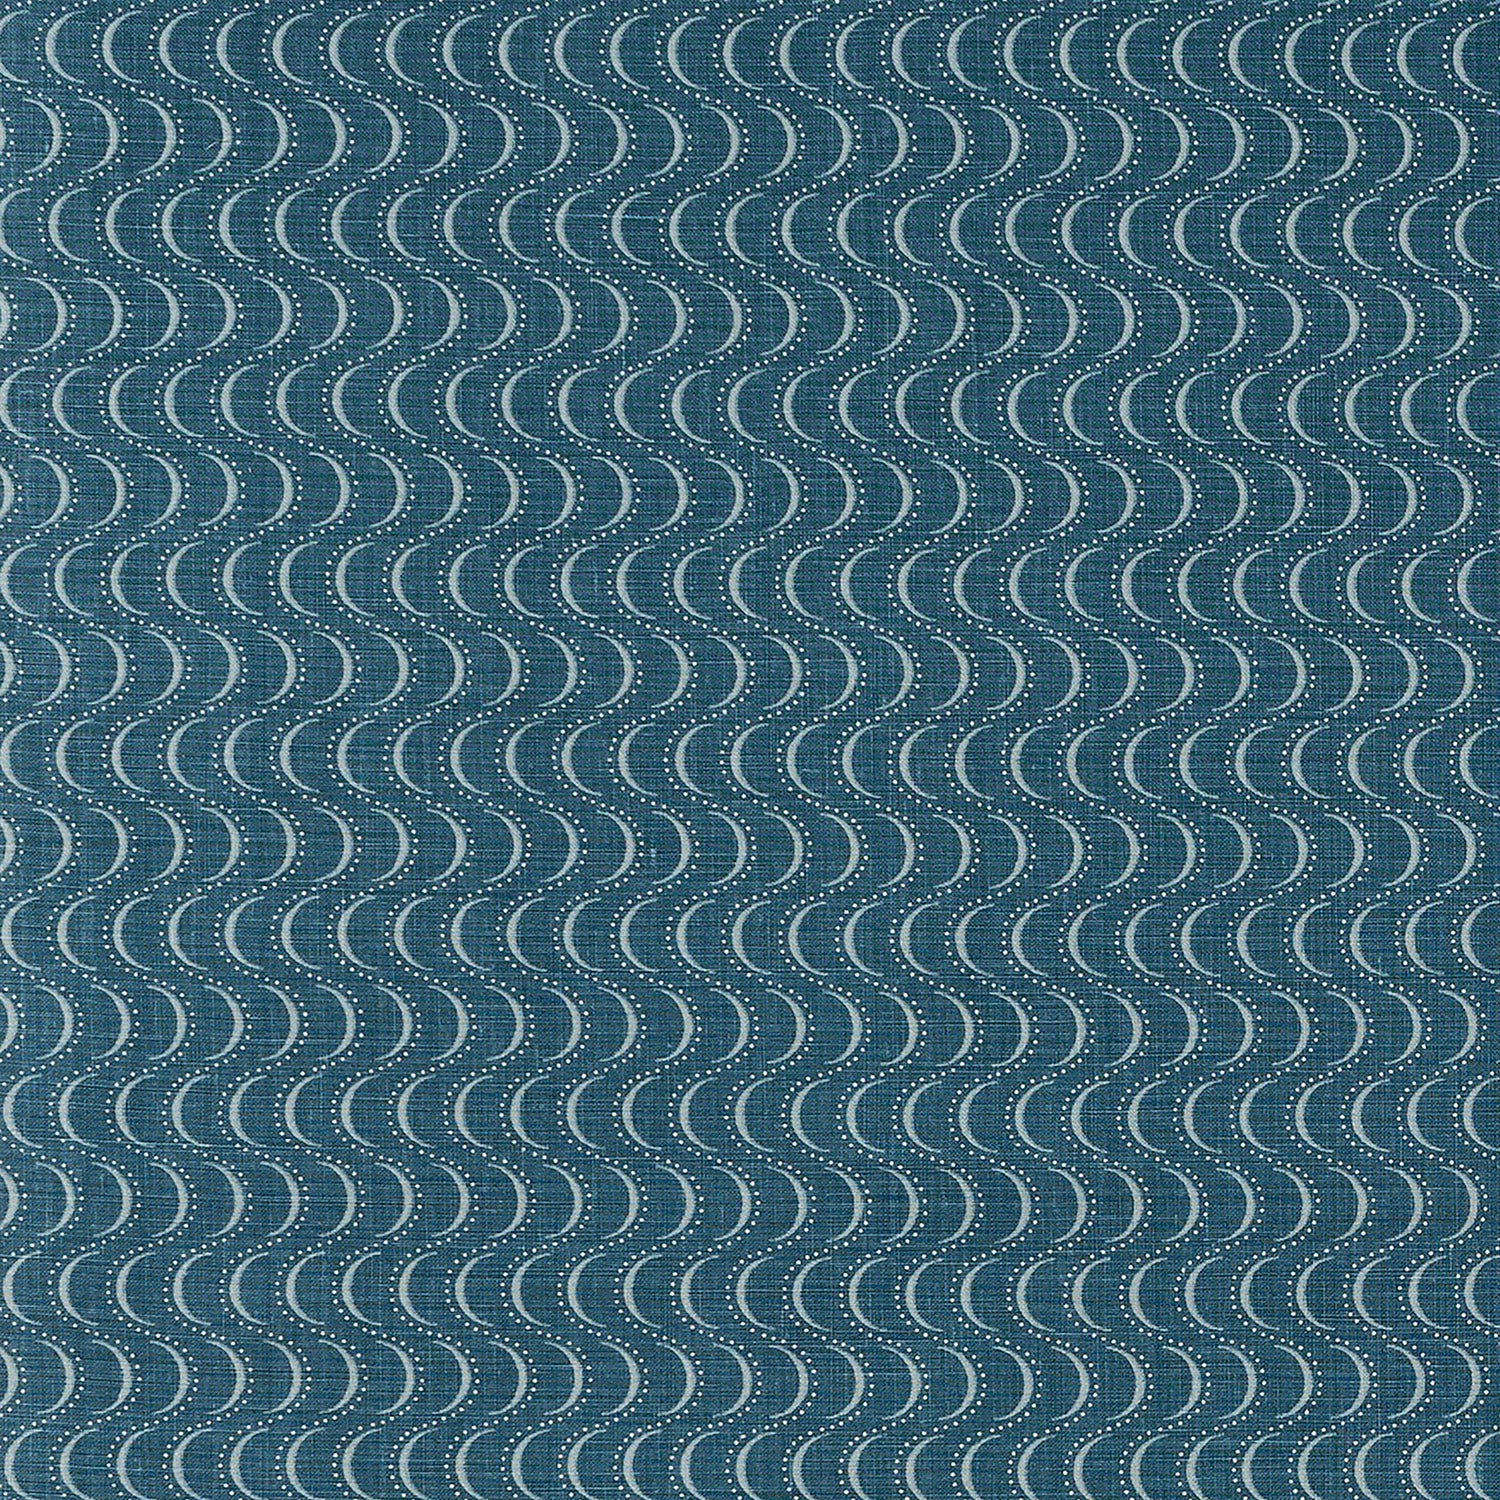 Fabric in an undulating stripe pattern in light blue and white on a navy field.